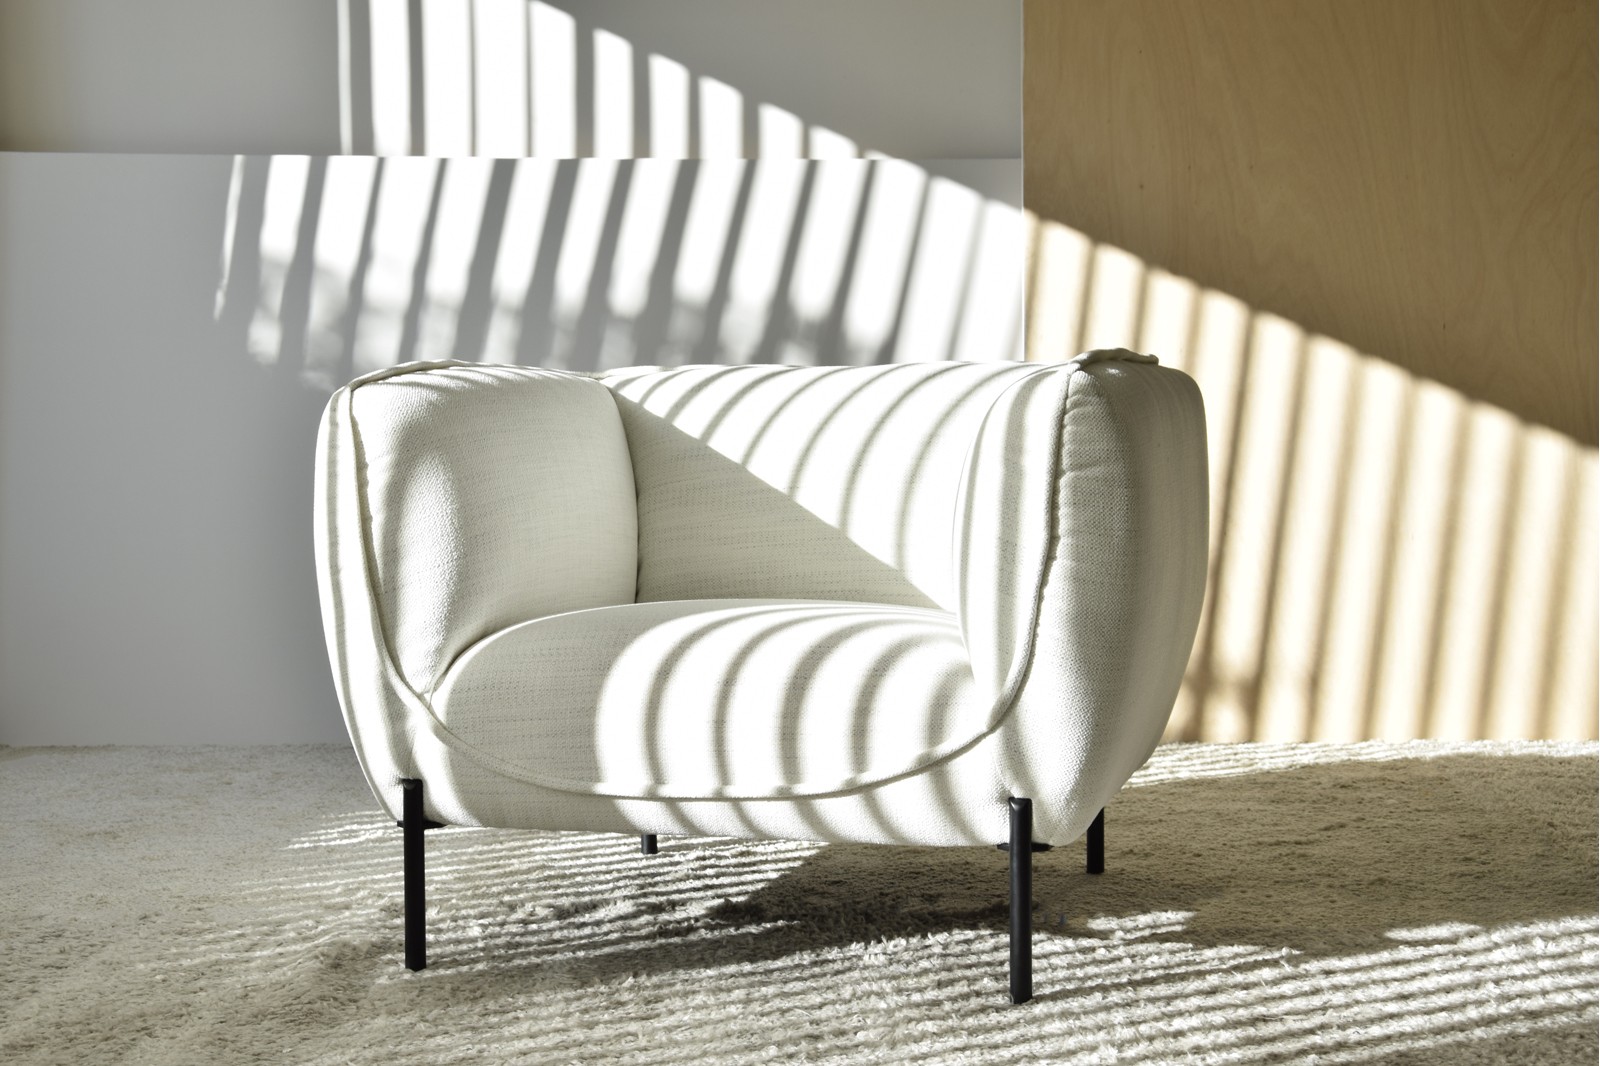 ARMCHAIR "FORMS". UPHOLSTERY IN WHITE TONES